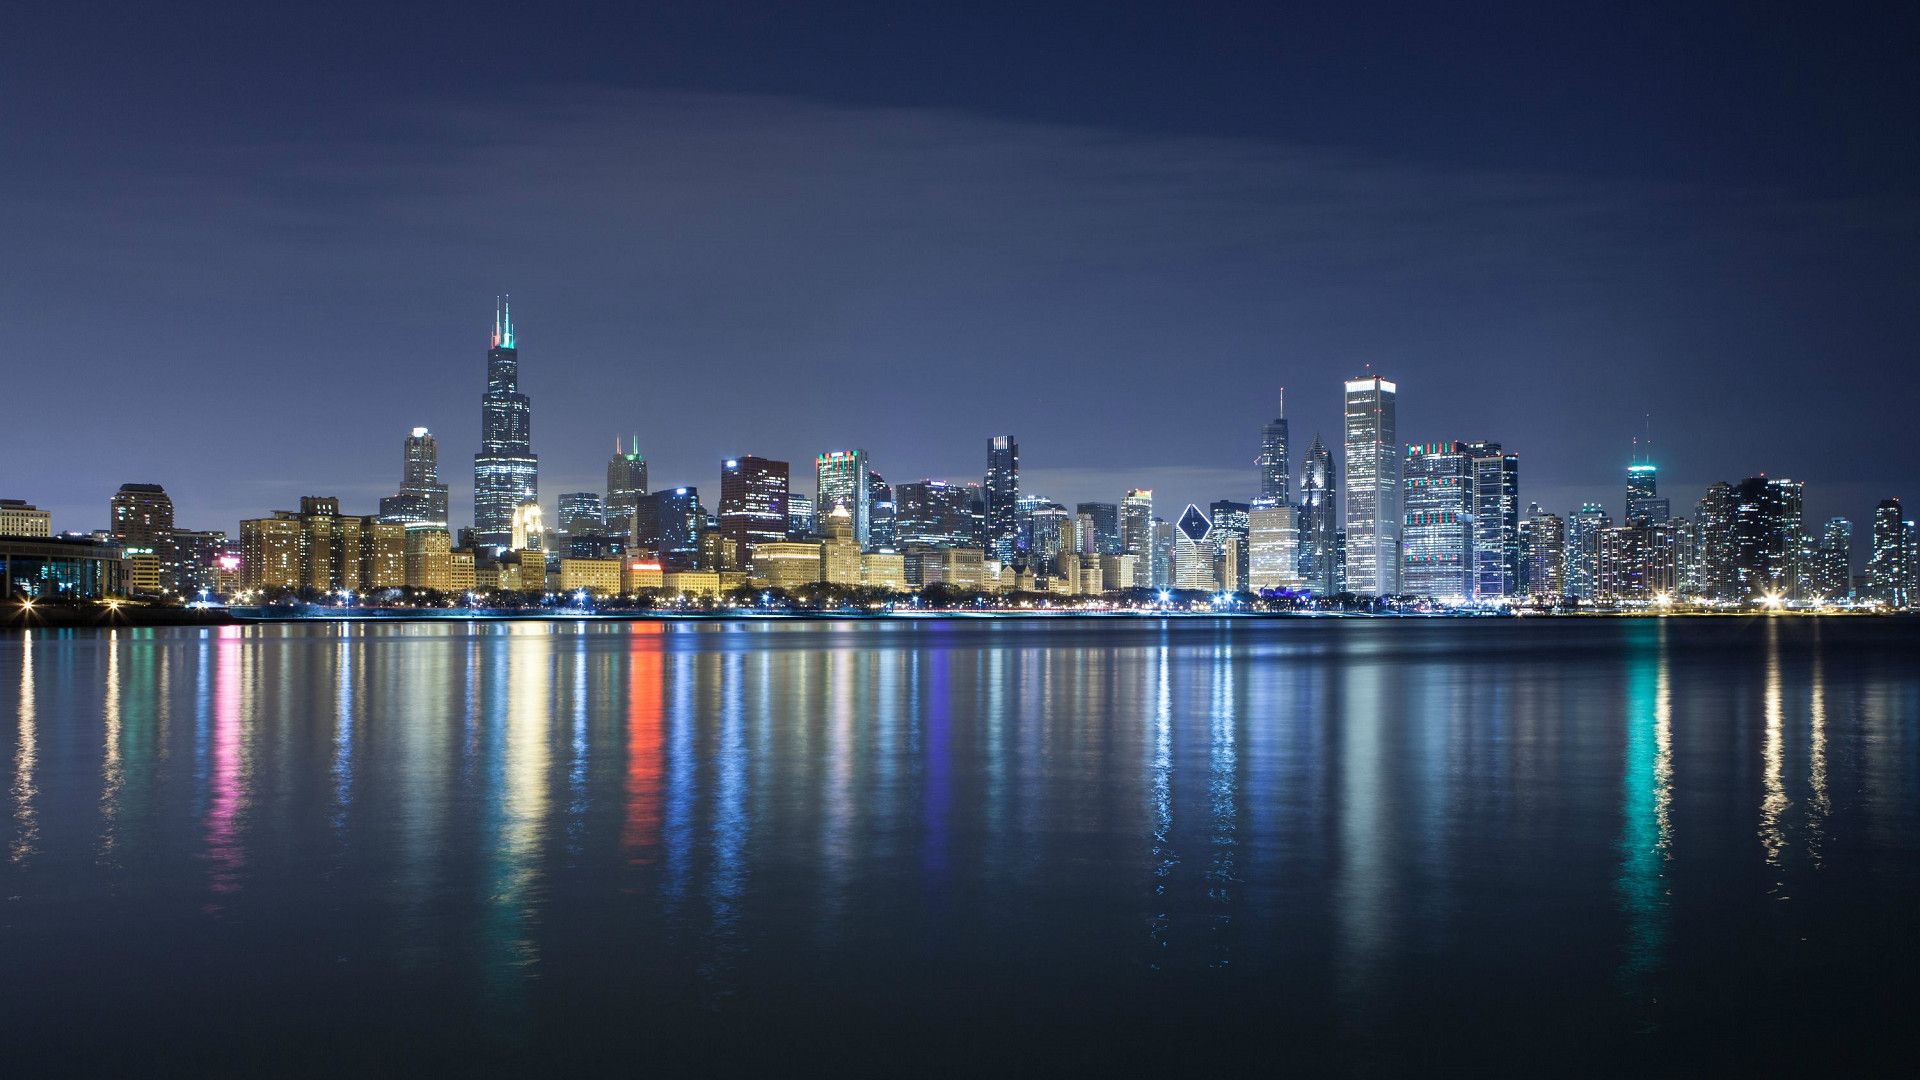 A city skyline at night with reflections in the water - Chicago